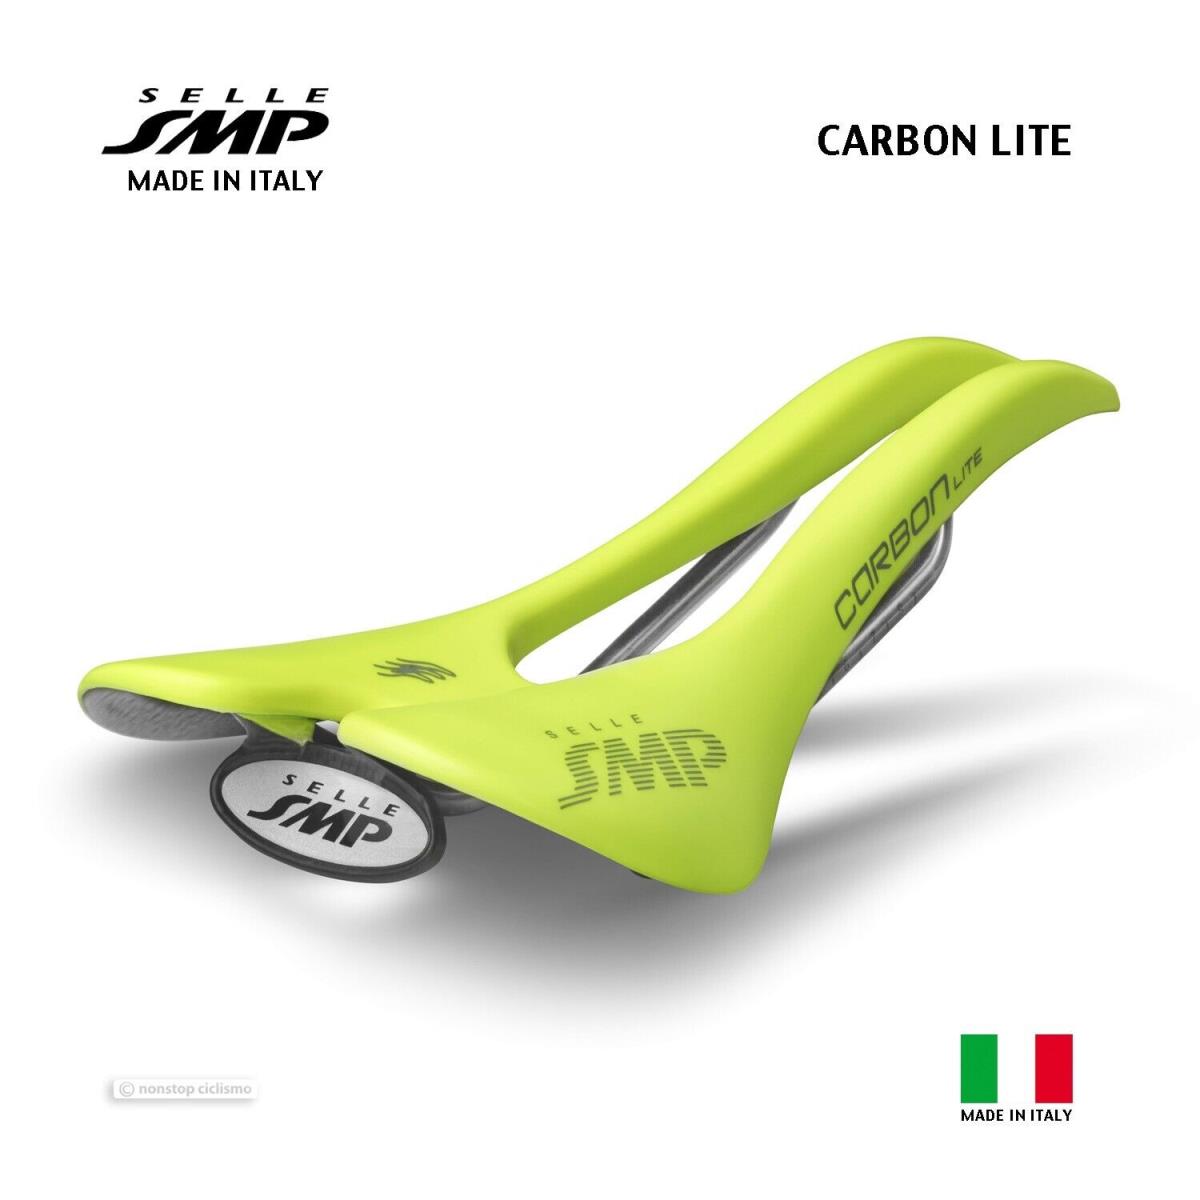 Selle Smp Carbon Lite Saddle : Yellow Fluo - Made IN Italy